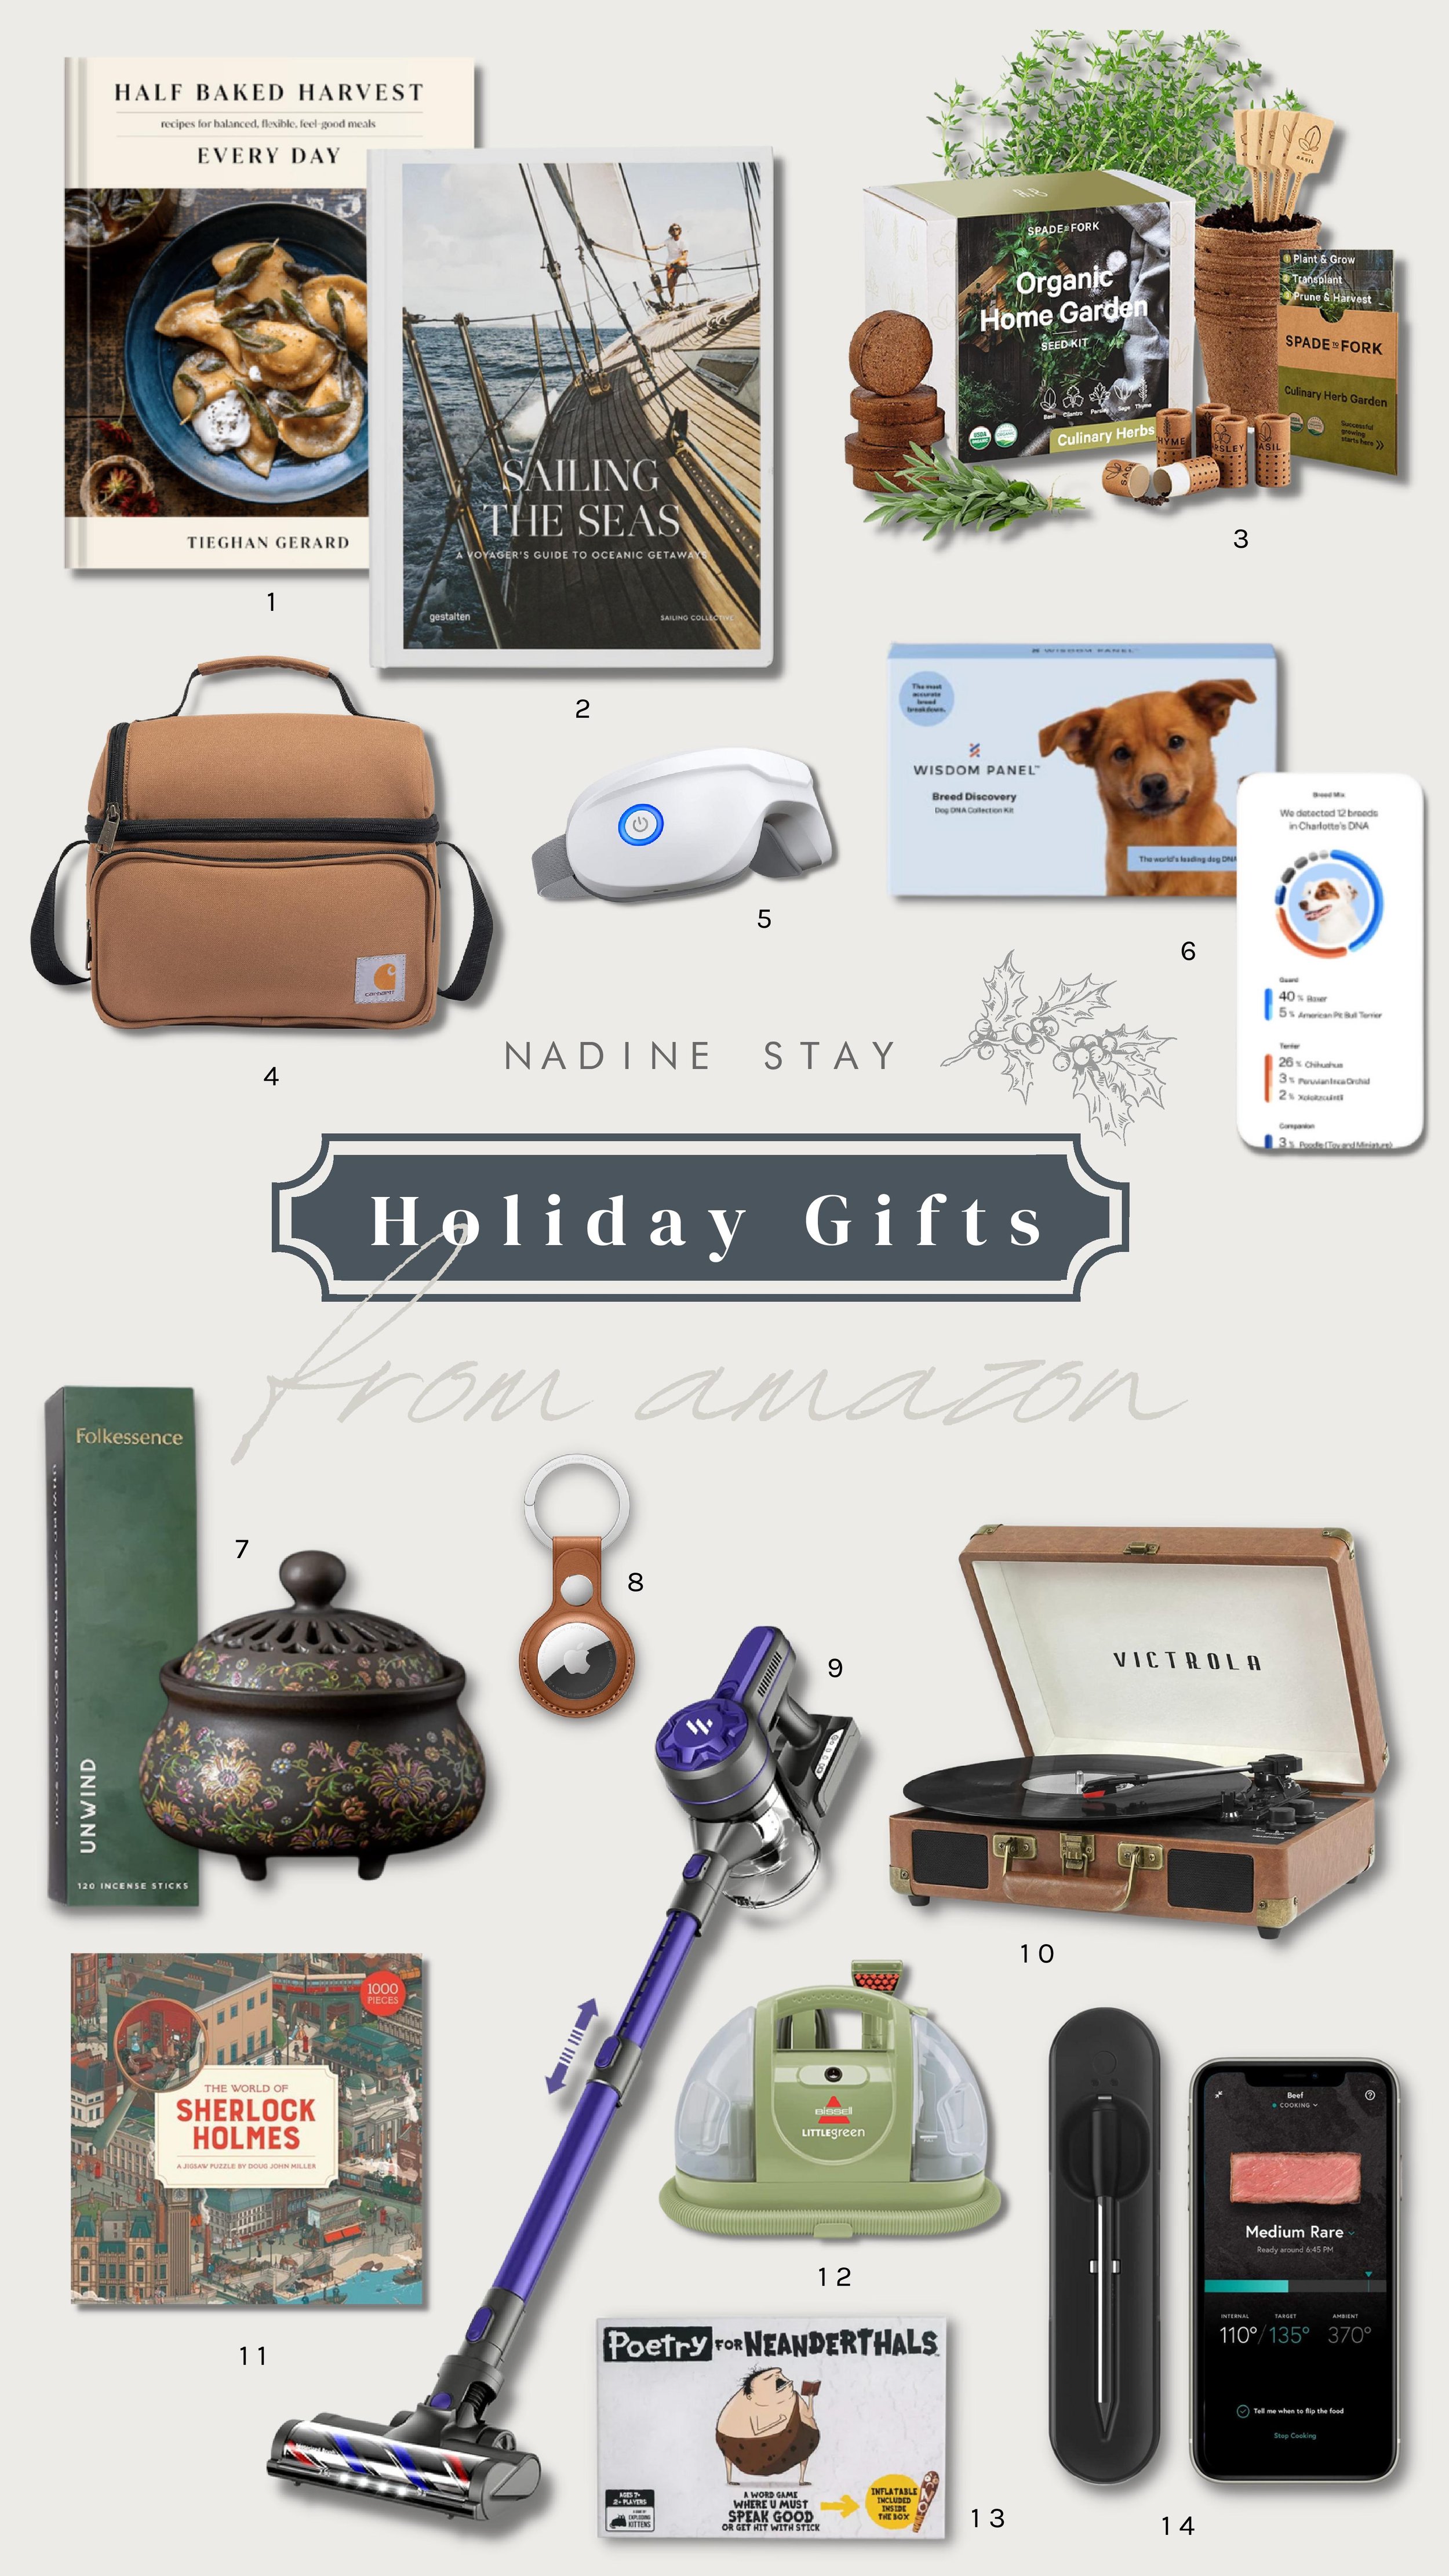 Holiday Gifts from Amazon - 14 Christmas gift ideas for him and her. Cookbook and adventure book. Indoor herb garden growing kit. Dog DNA test you can gift a dog lover. Budget friendly portable record player. Dyson stick vacuum dupe under $150.